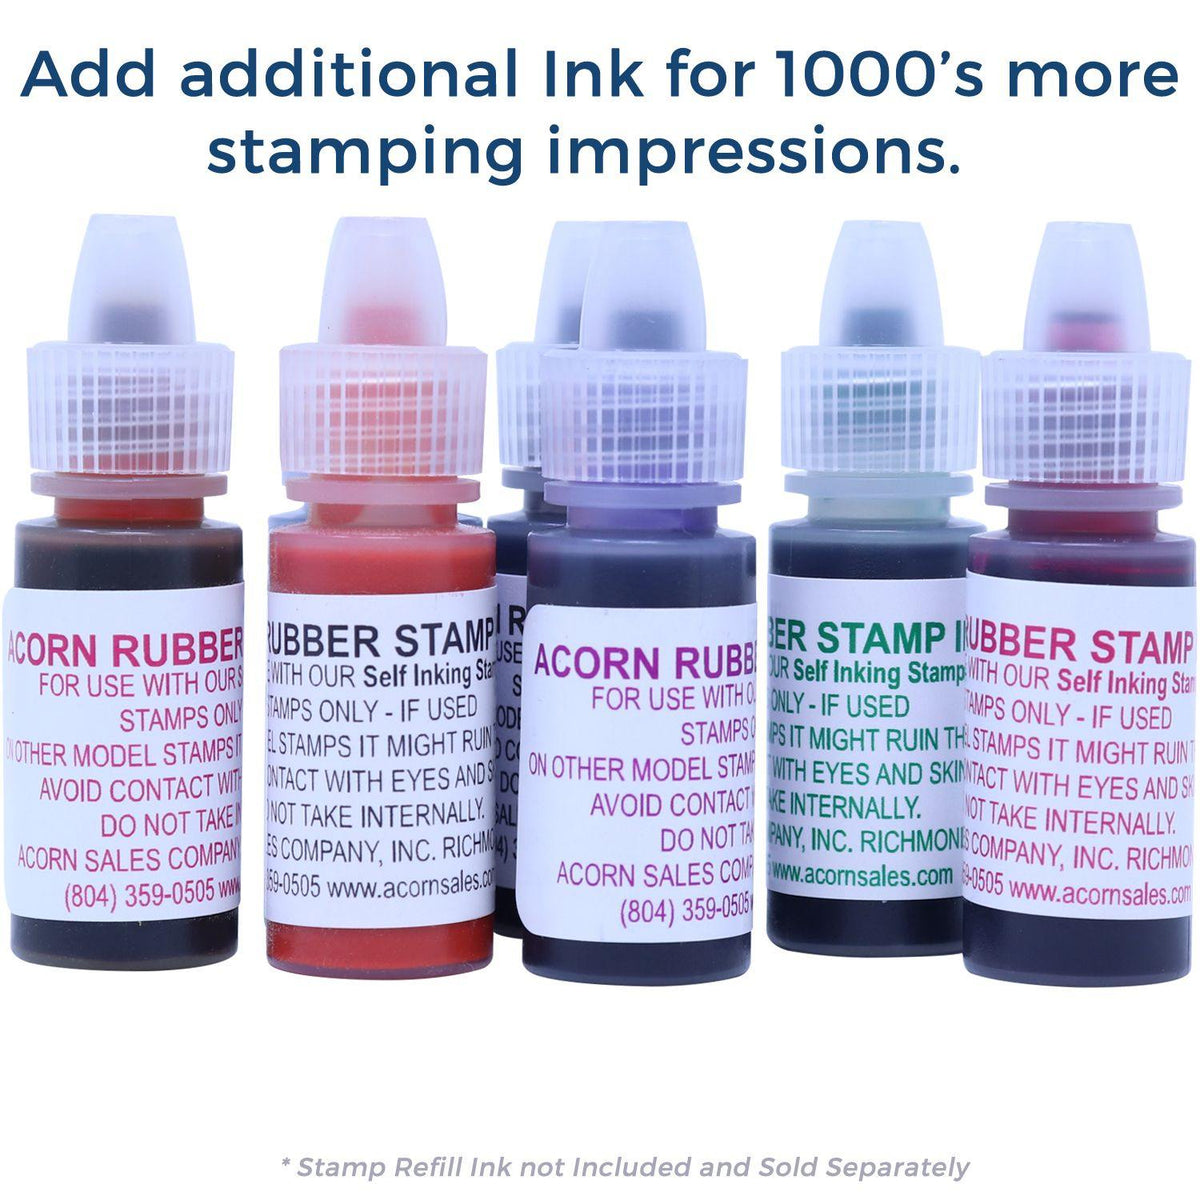 Refill Inks for Large Pre-Inked Invoice Stamp Available